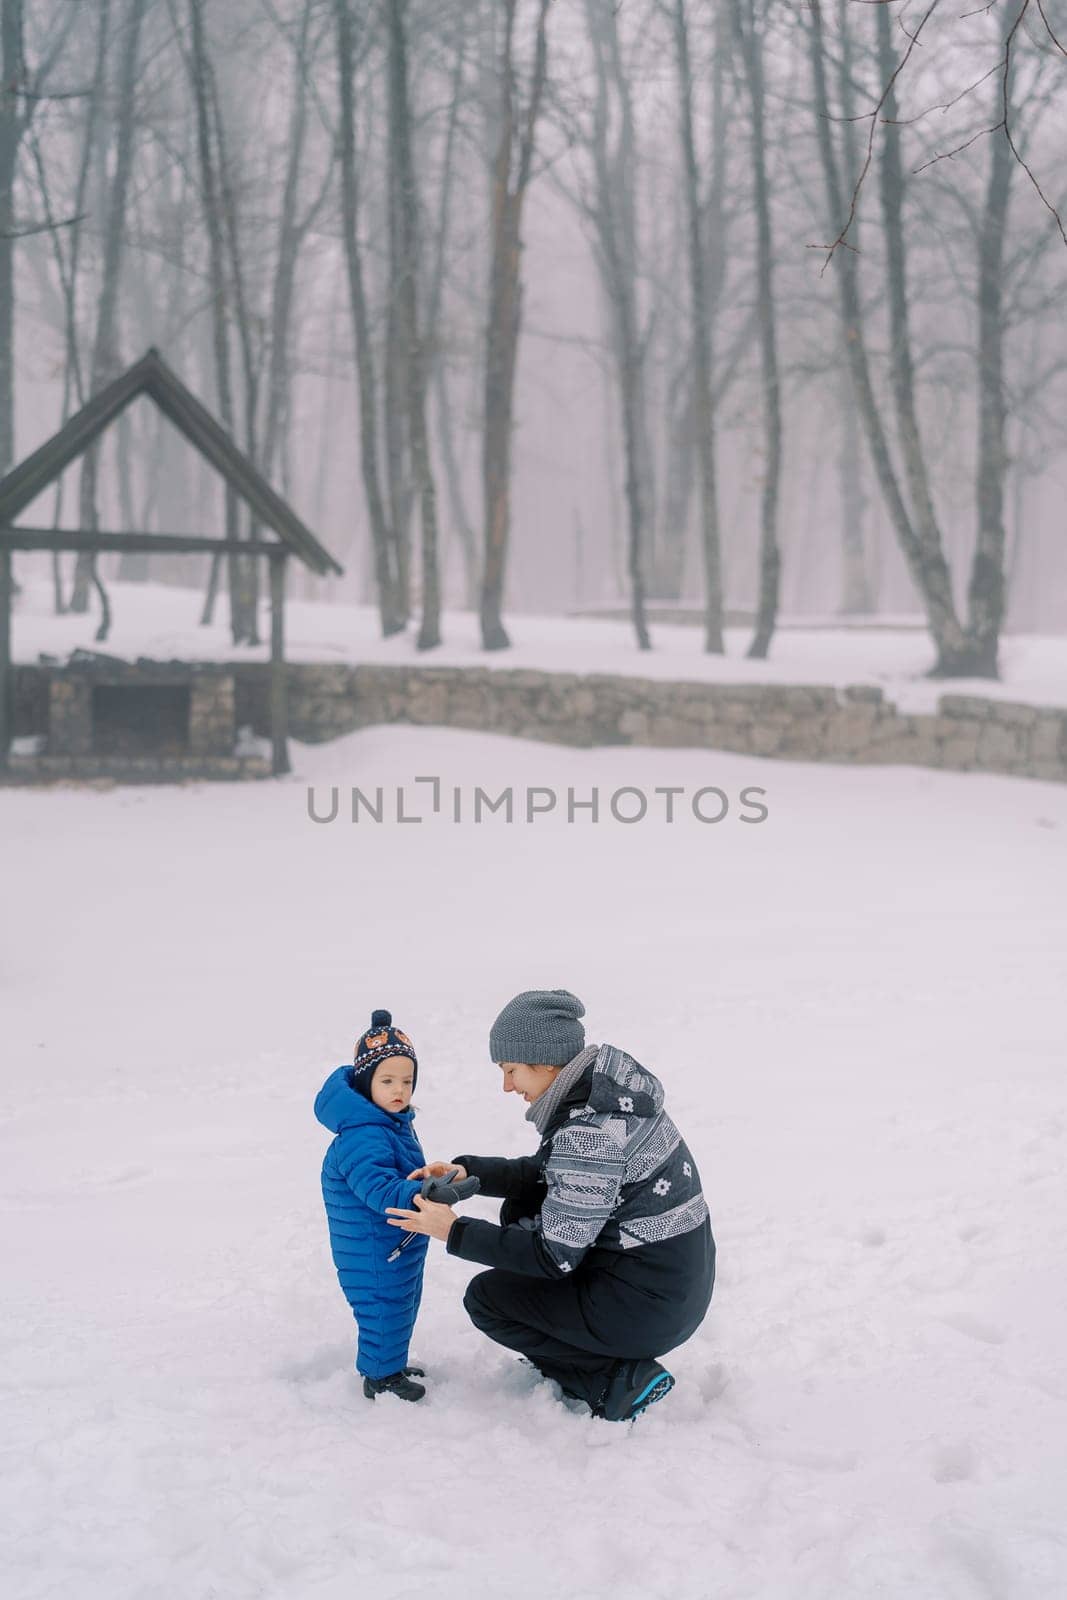 Mom puts on mittens to a little girl squatting in a snowy forest by Nadtochiy